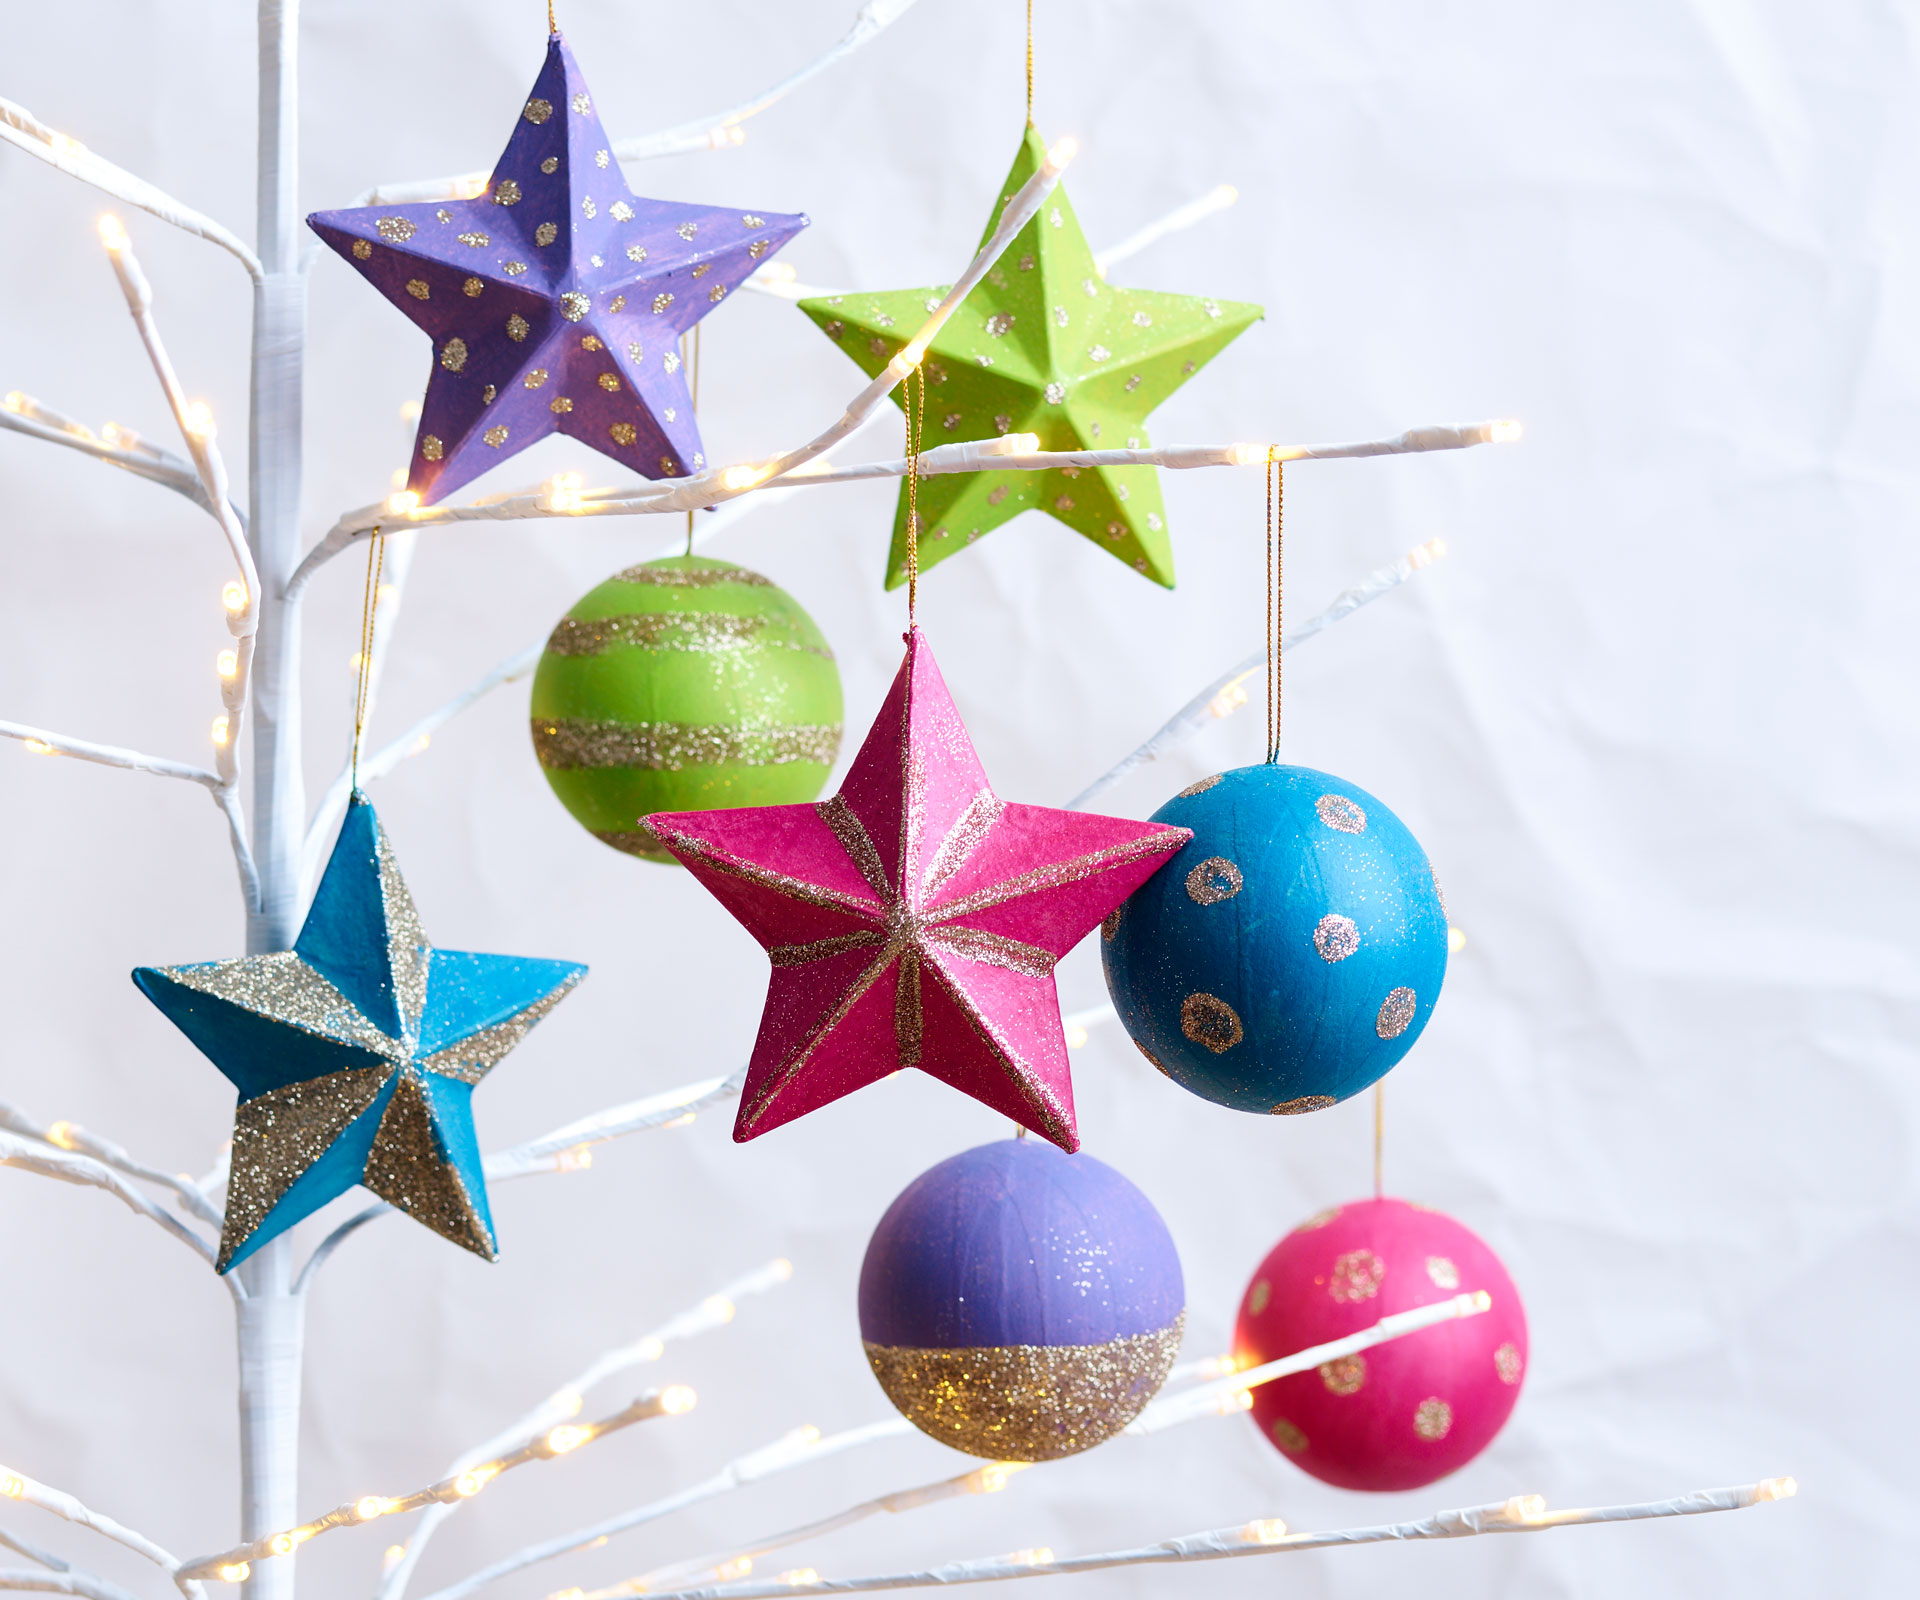 4 Fun Diy Christmas Decorations You Can Make With The Kids